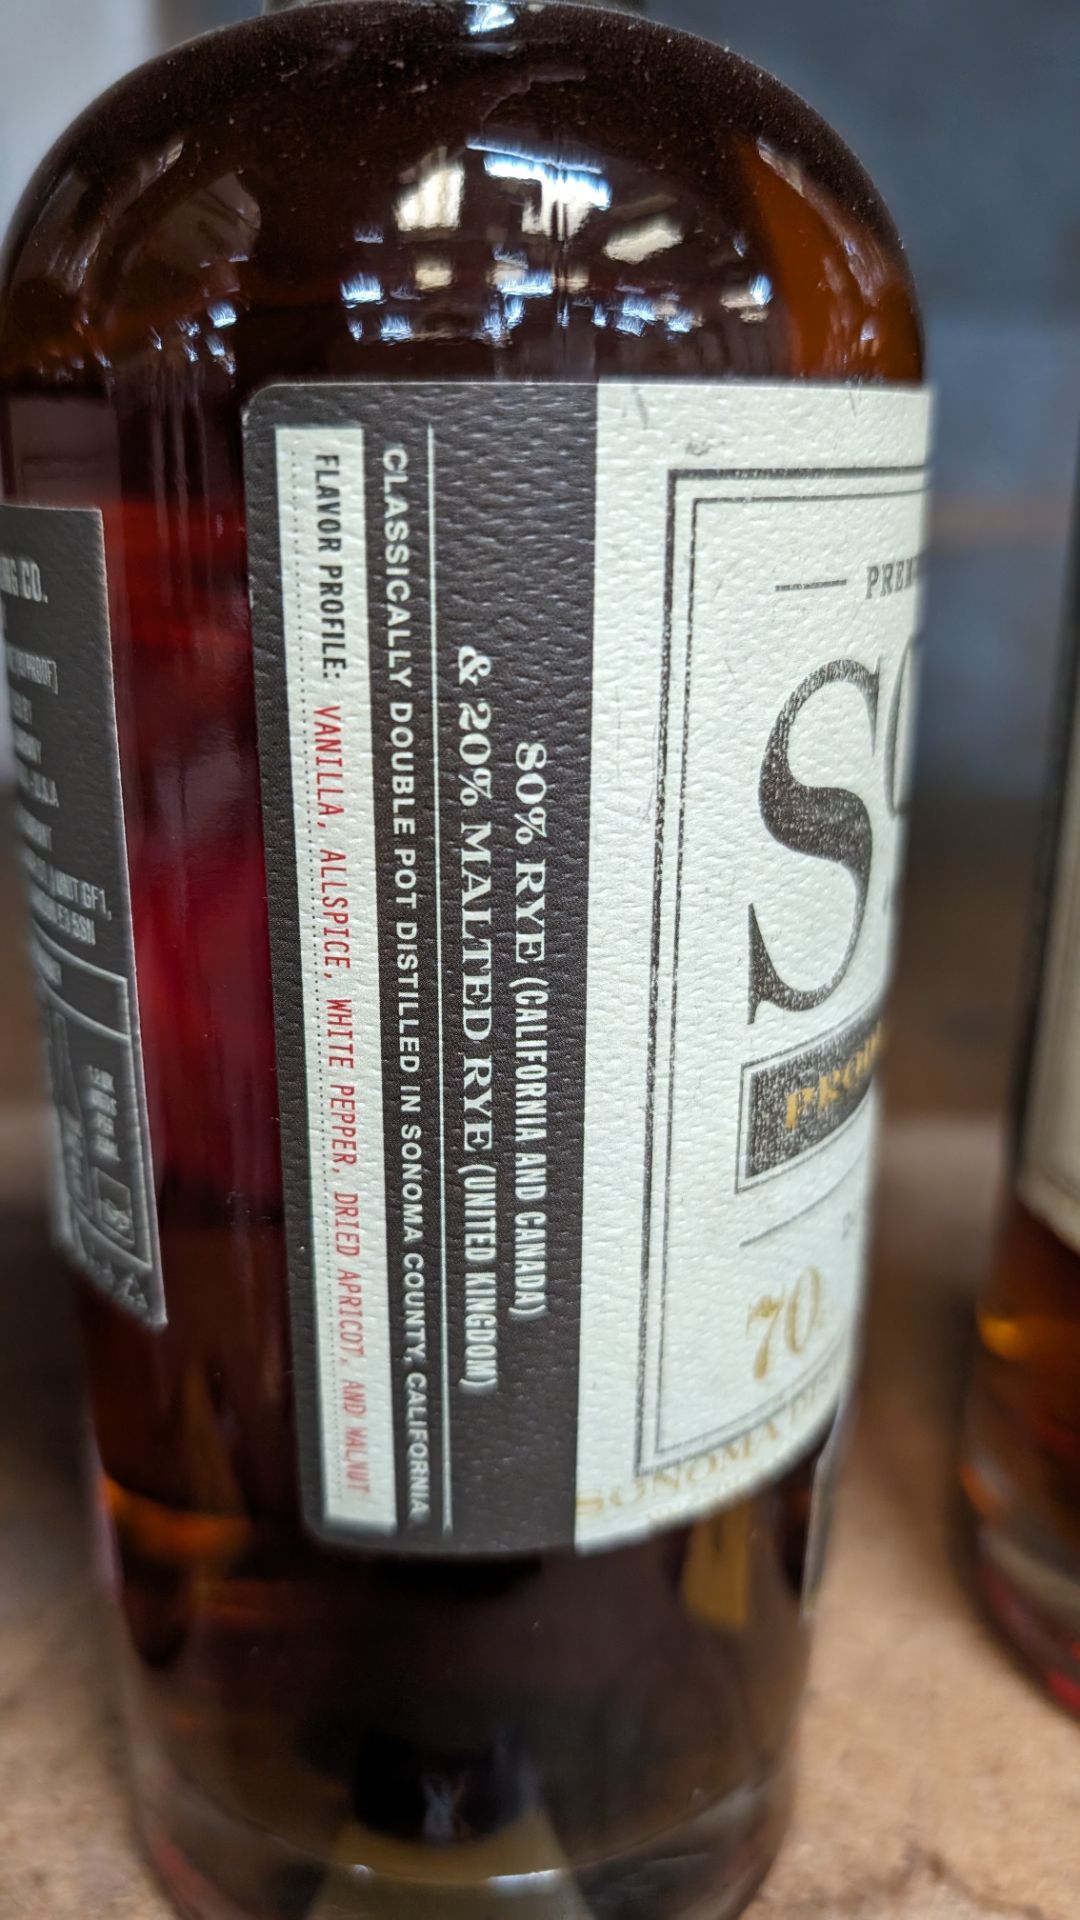 1 off 700ml bottle of Sonoma Rye Whiskey. 46.5% alc/vol (93 proof). Distilled and bottled in Sonom - Image 3 of 5